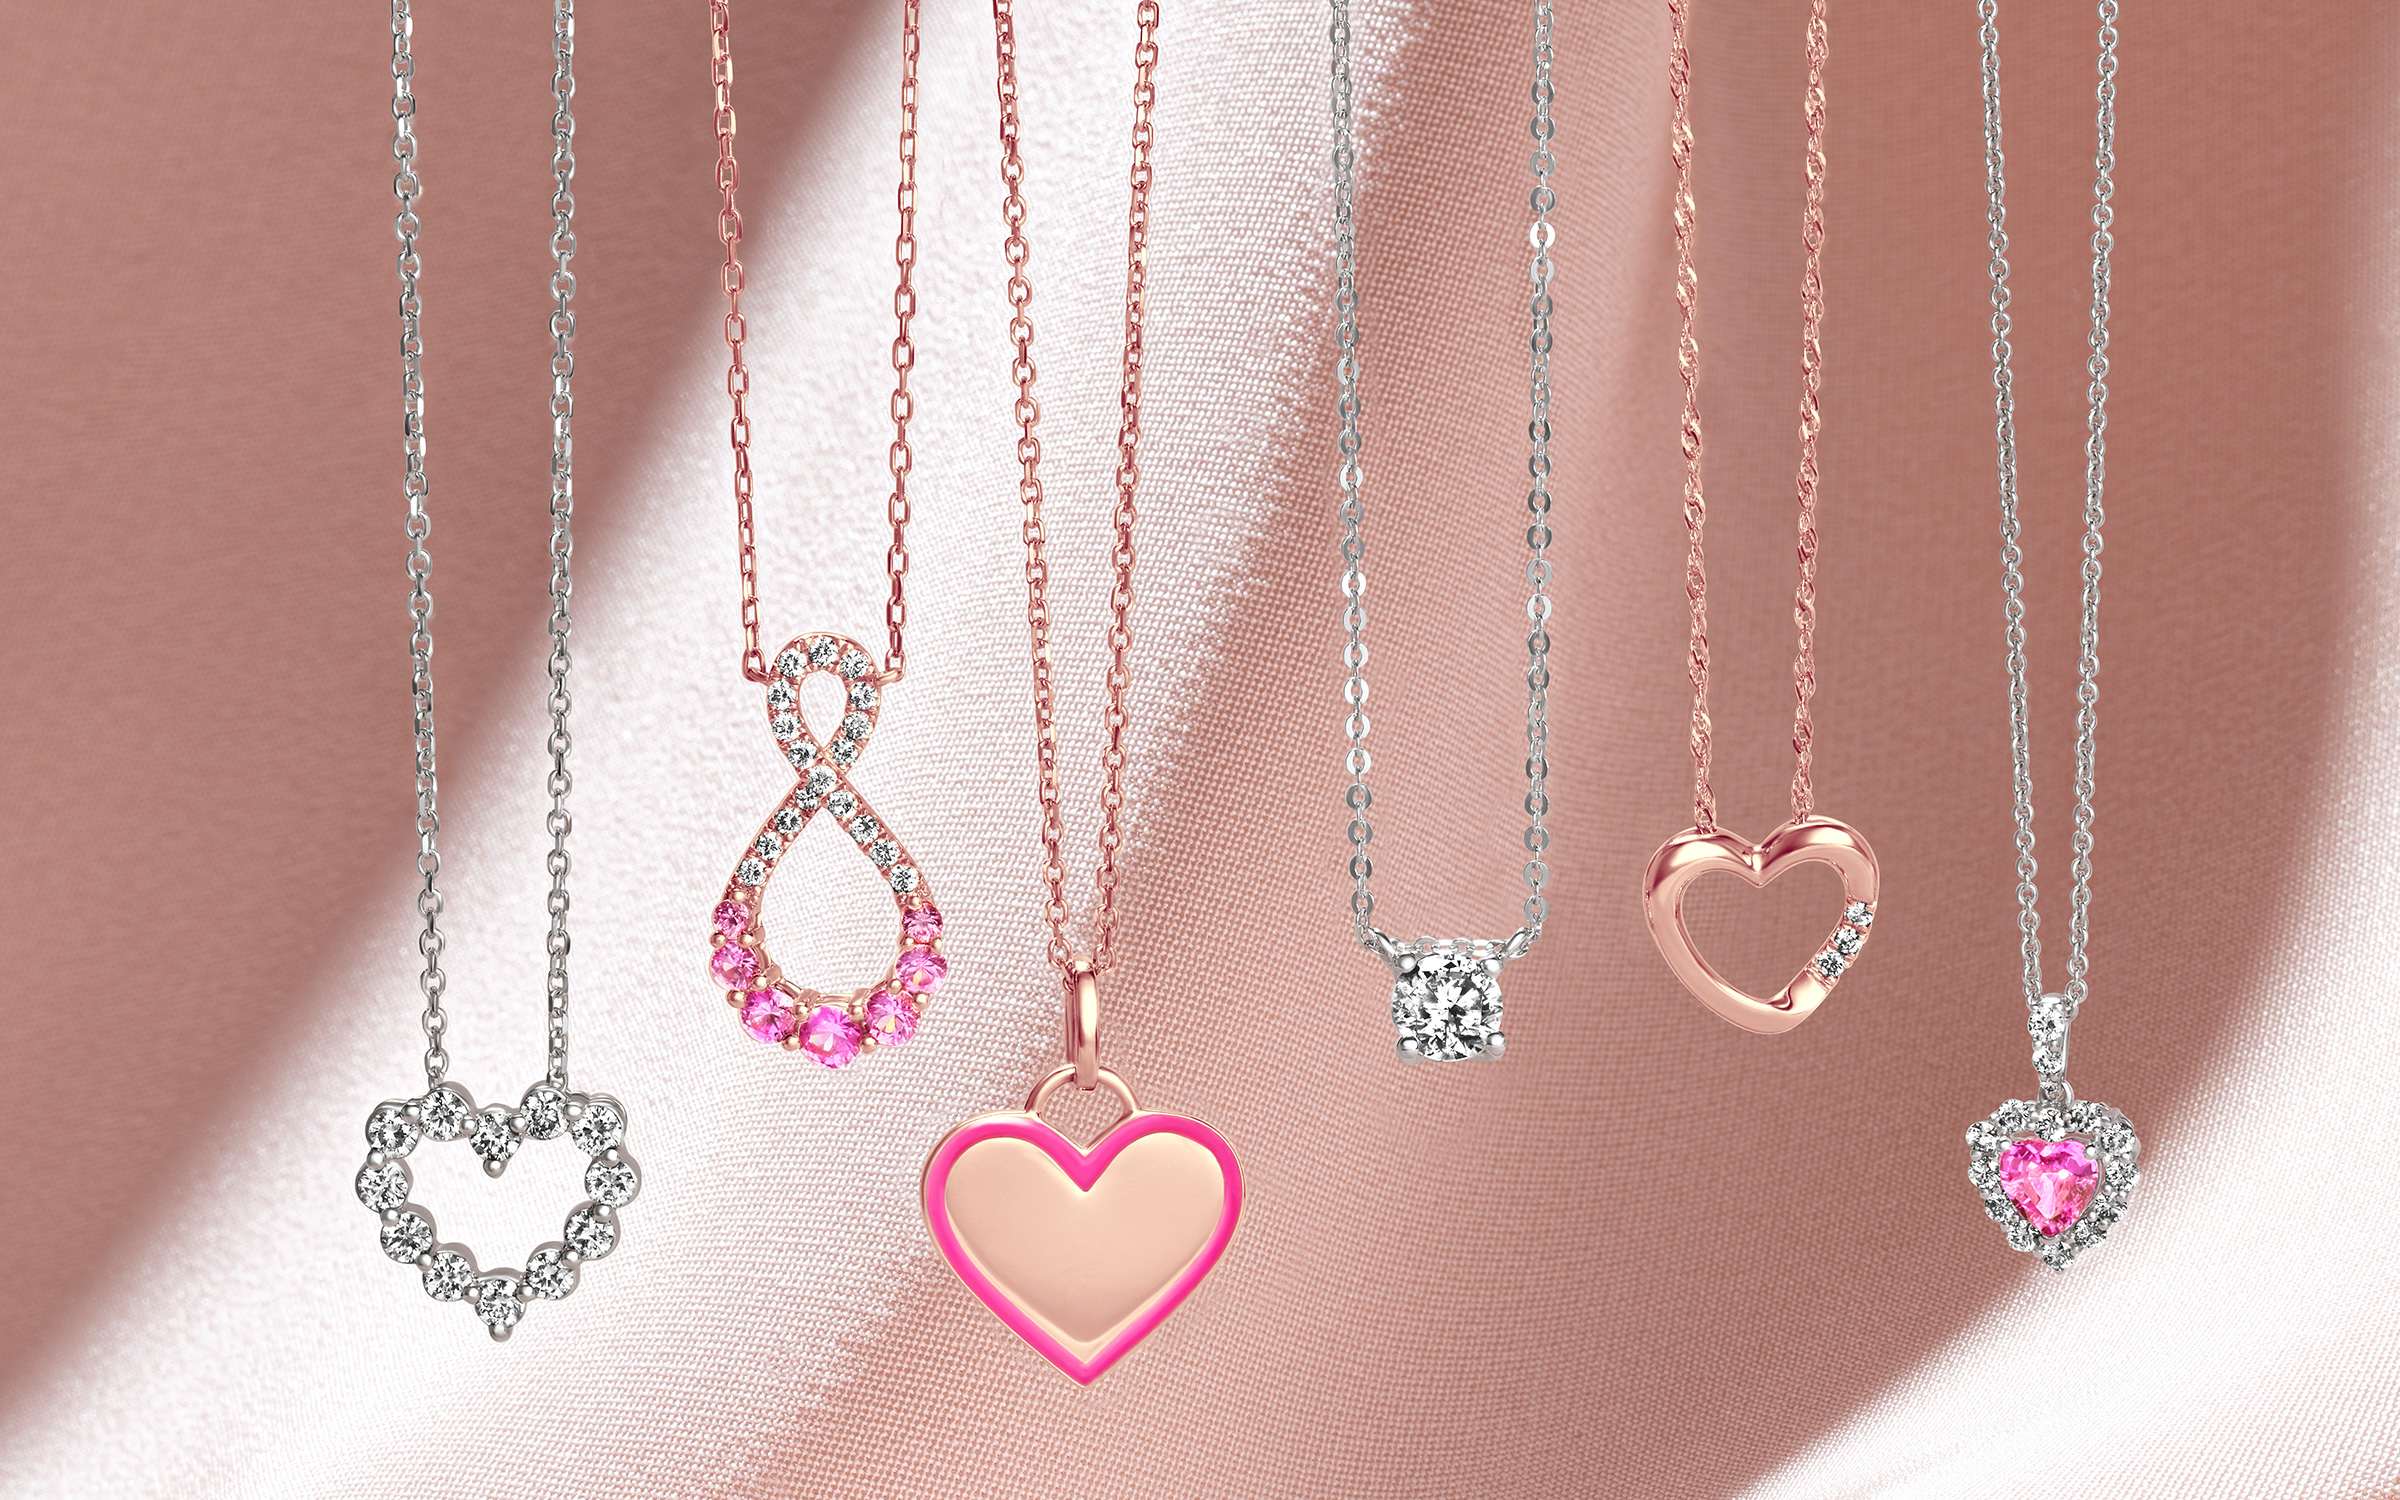 Diamond, pearls and gold: Shop the Valentine's Day jewelry she